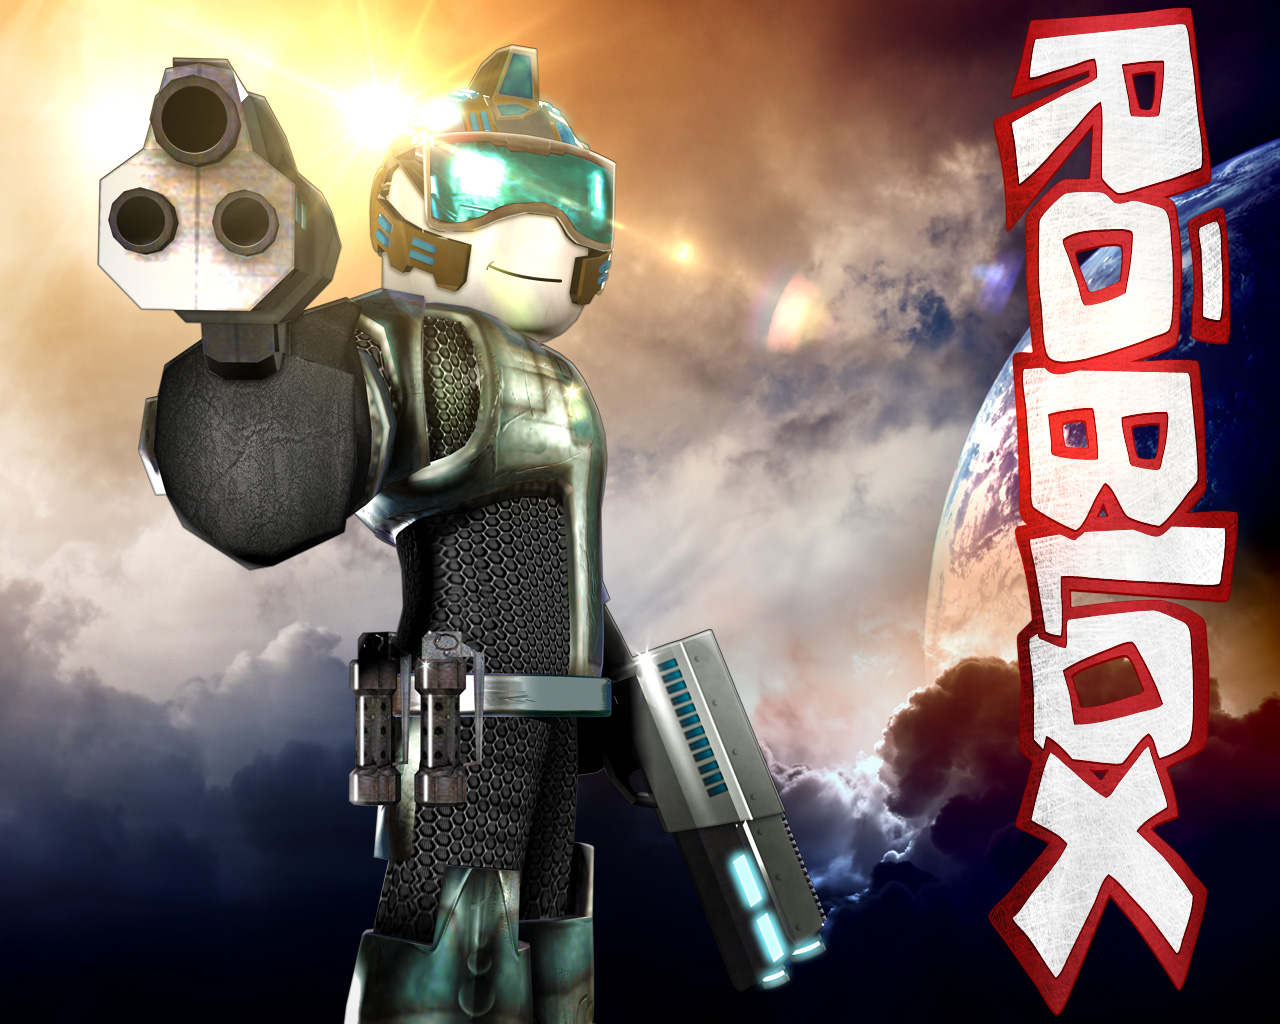 Free Download Roblox Wallpaper Hd Good Galleries 1280x1024 For